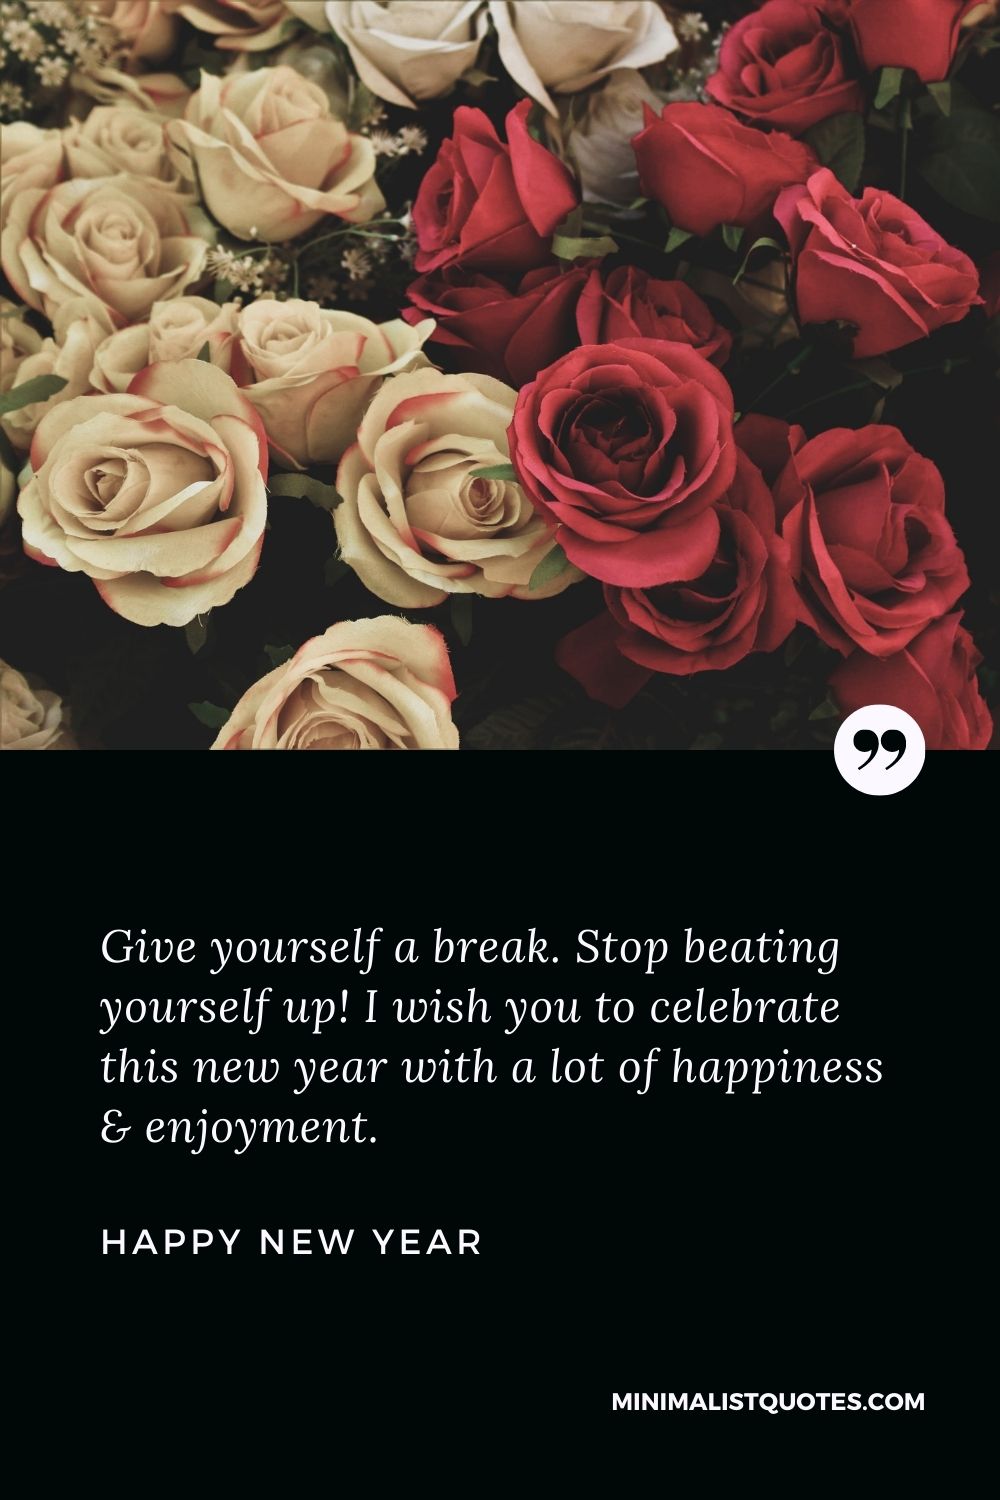 New Year Wish - Give yourself a break. Stop beating yourself up! I wish you to celebrate this new year with a lot of happiness & enjoyment.